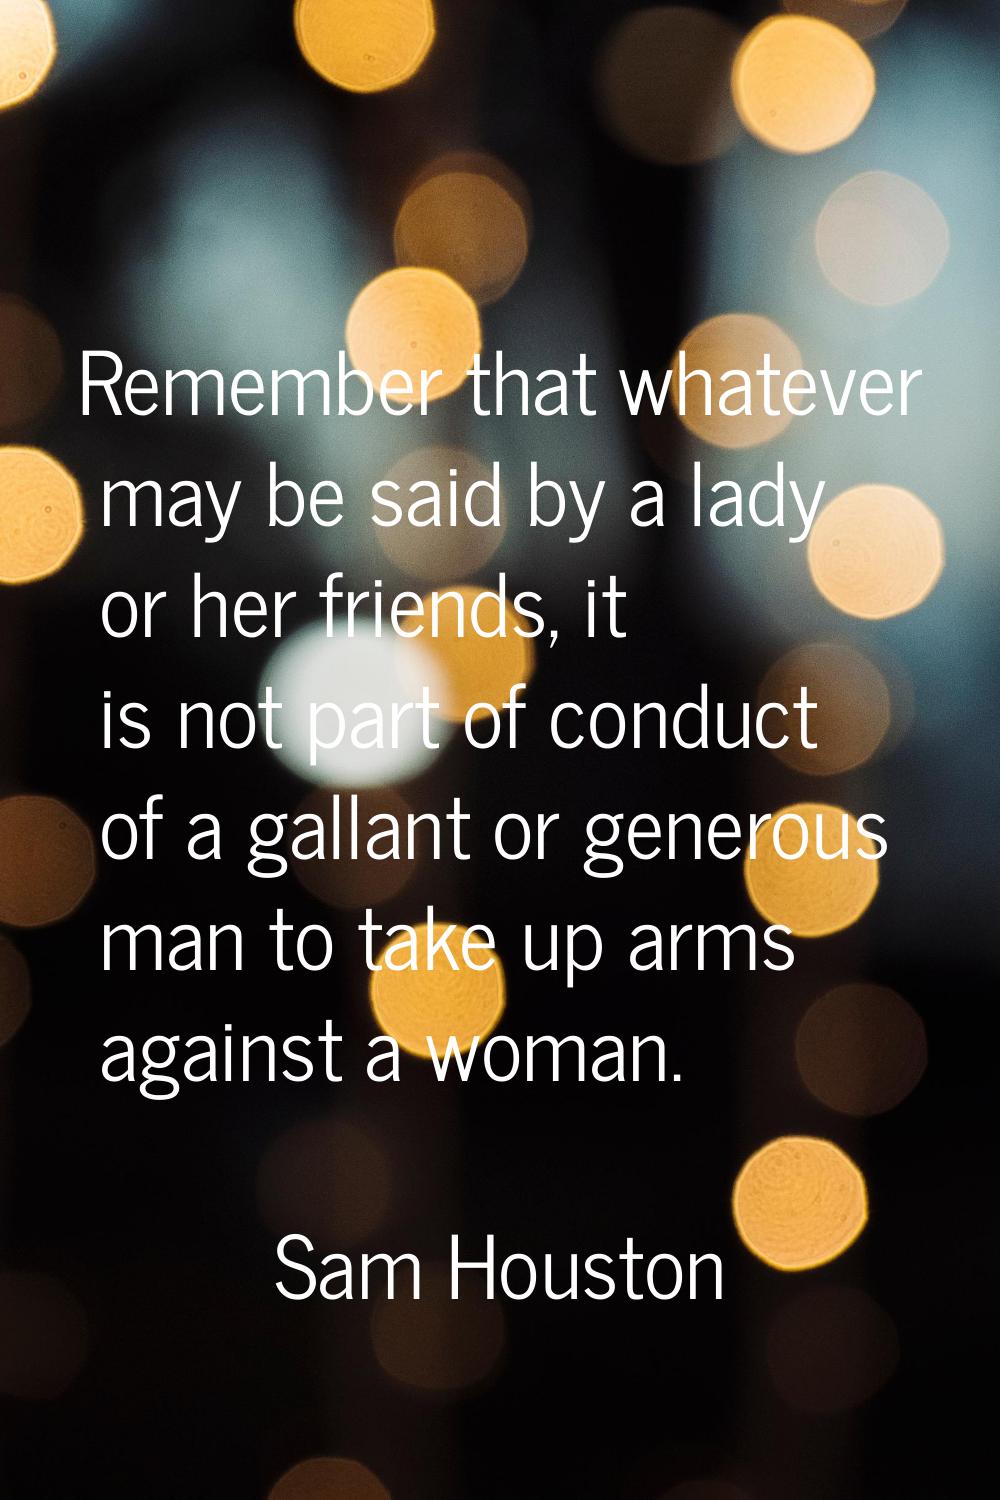 Remember that whatever may be said by a lady or her friends, it is not part of conduct of a gallant